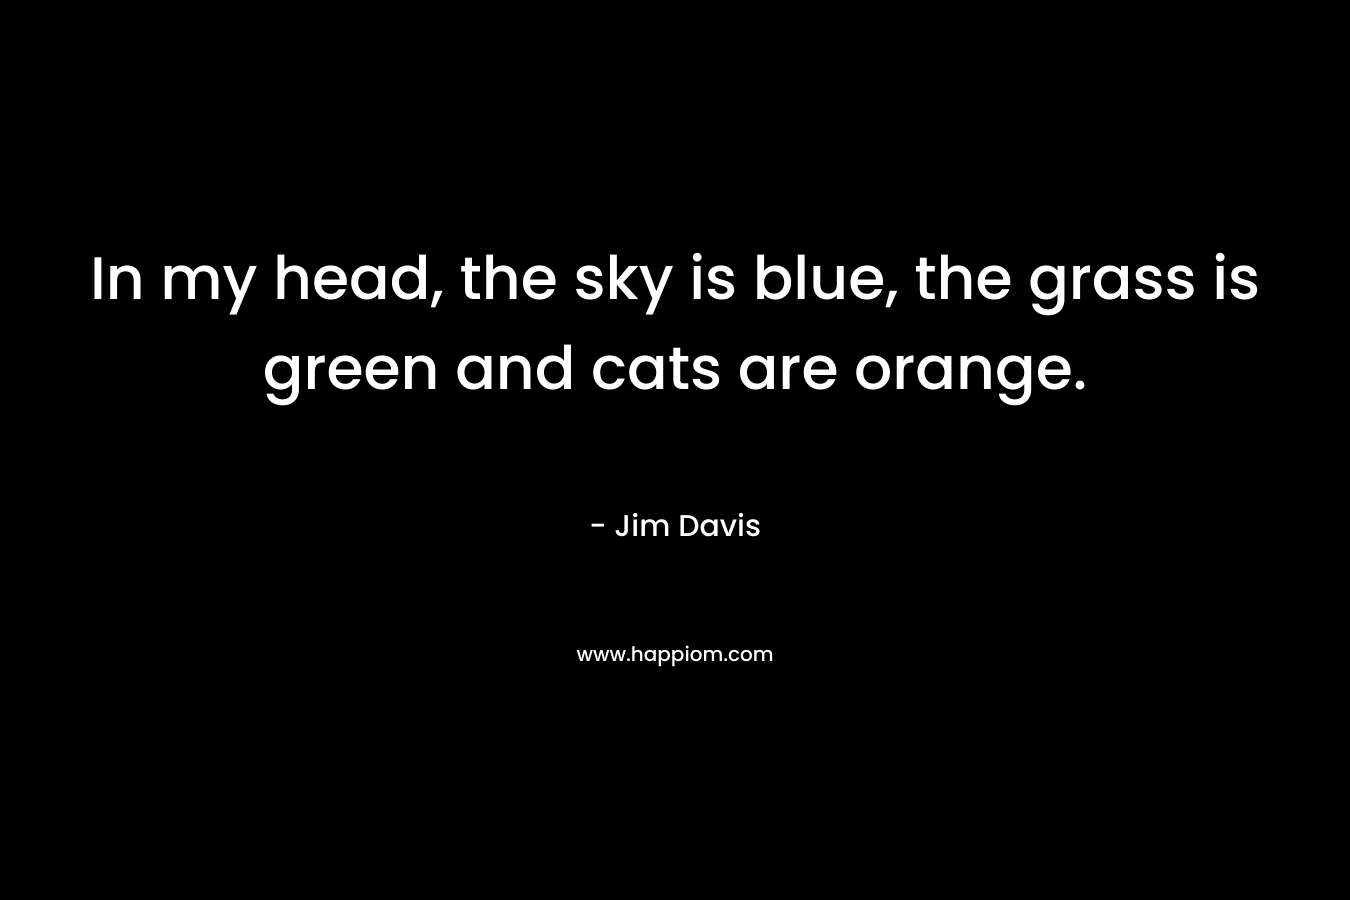 In my head, the sky is blue, the grass is green and cats are orange. – Jim Davis